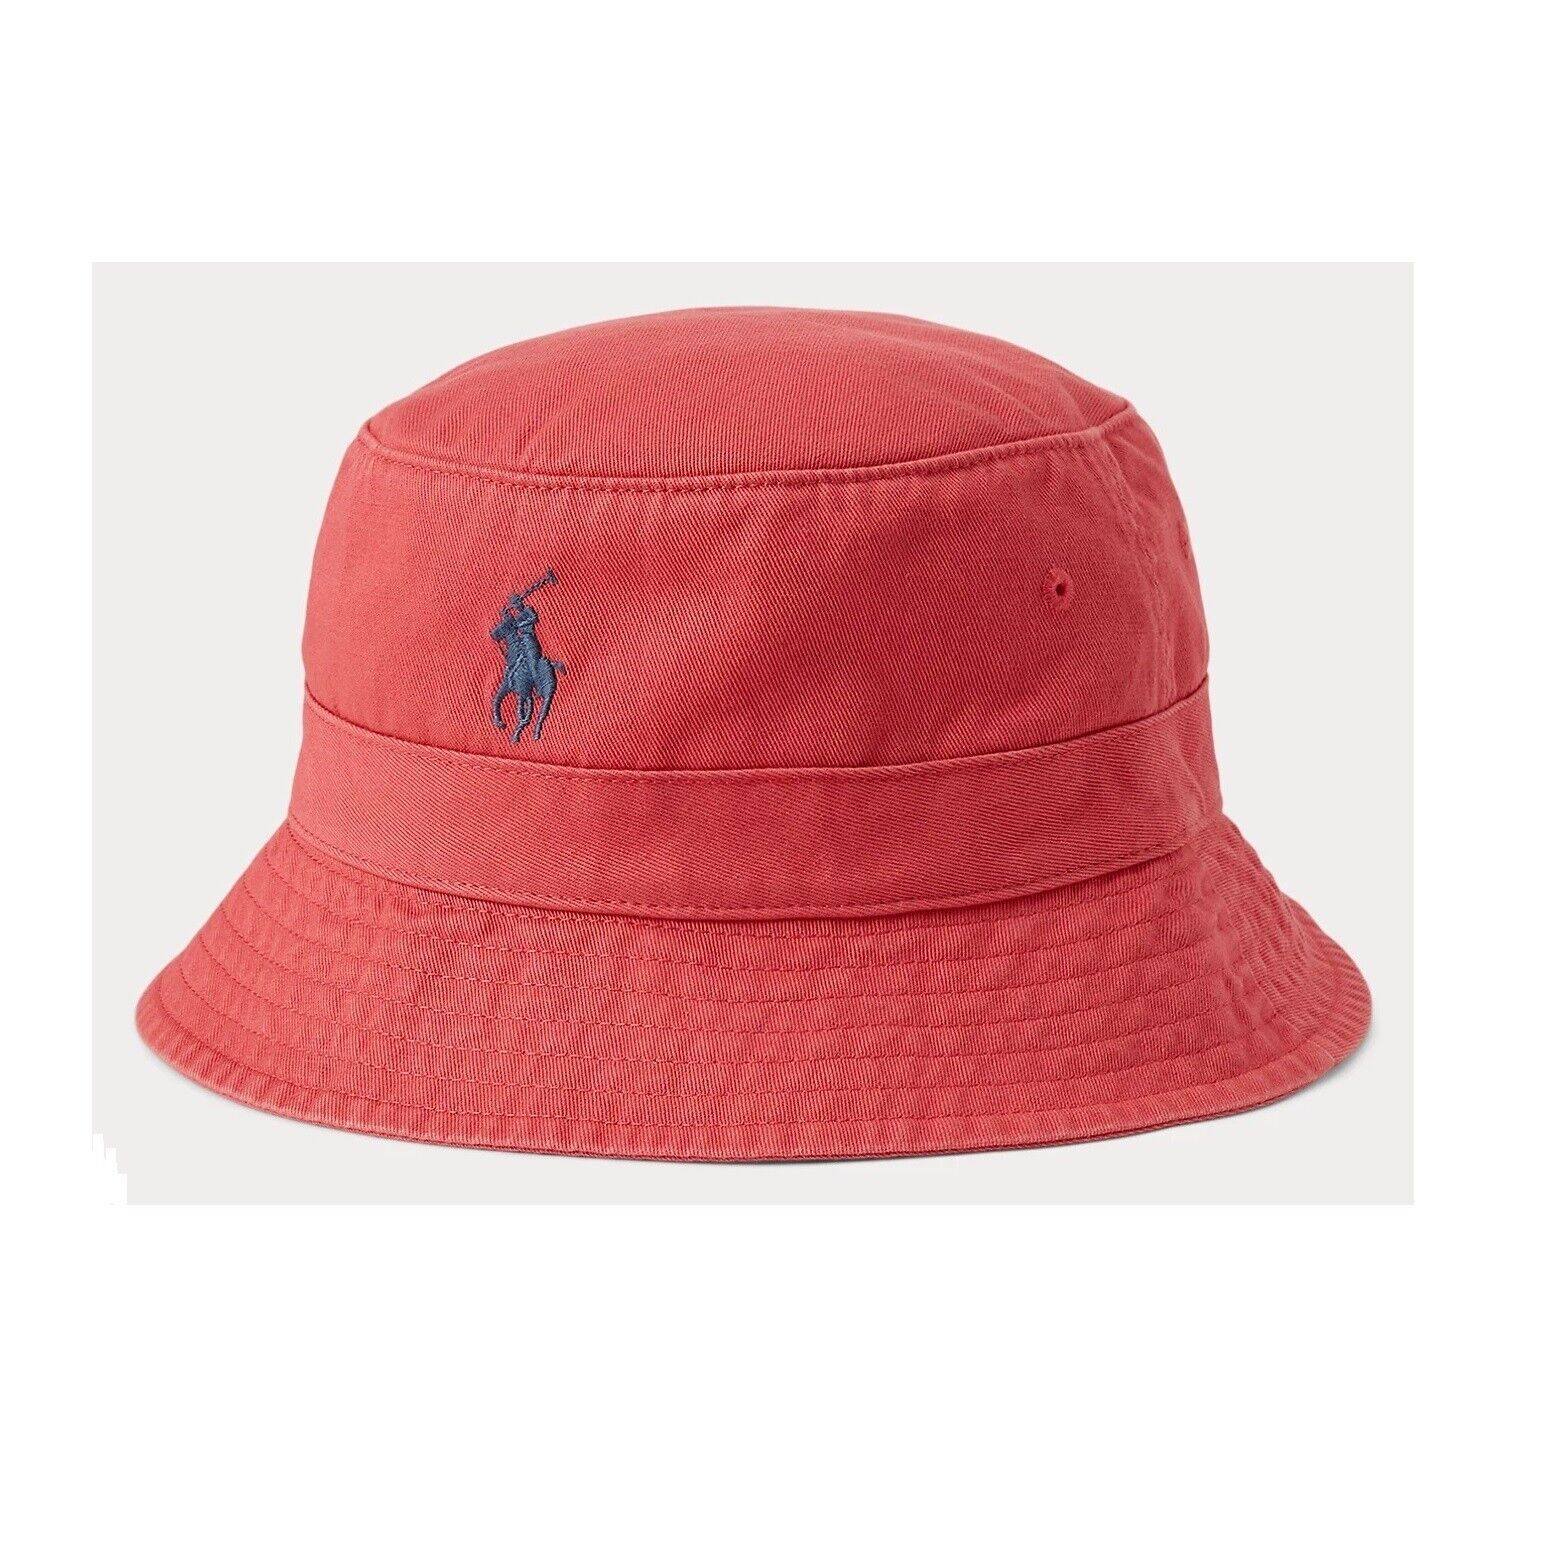 Polo Ralph Lauren Men's Chino Cotton Bucket Hat Embroidered Pony Red Sky